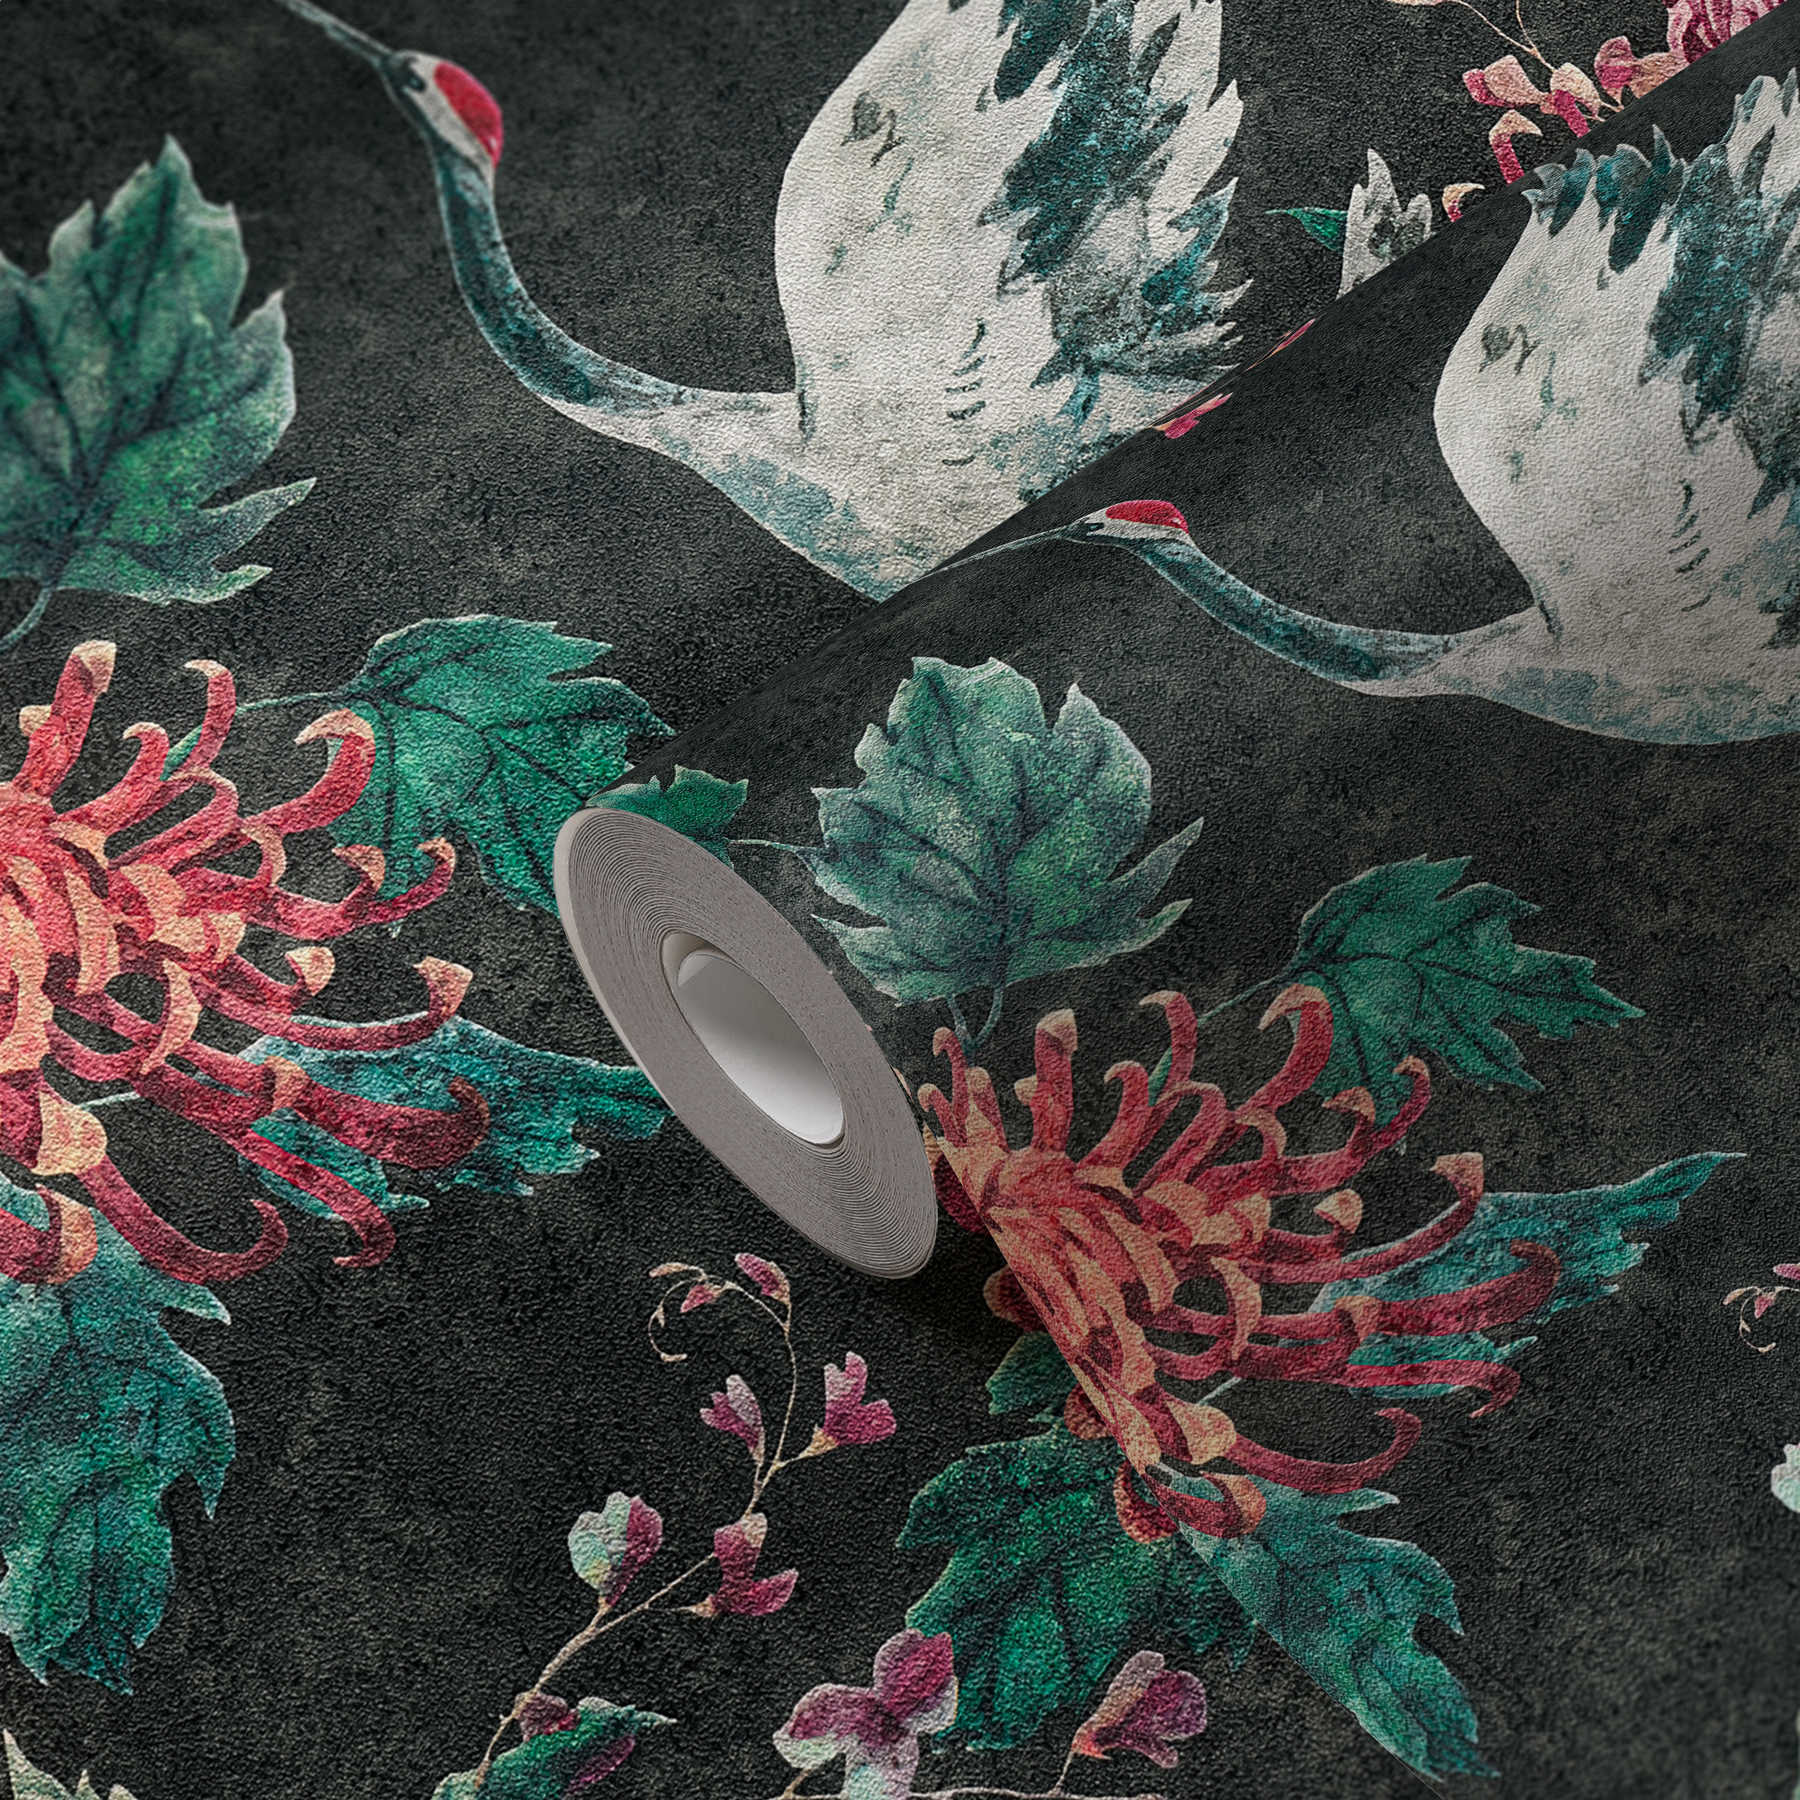             Pattern wallpaper with Asian crane and flower motif - black, red, green
        